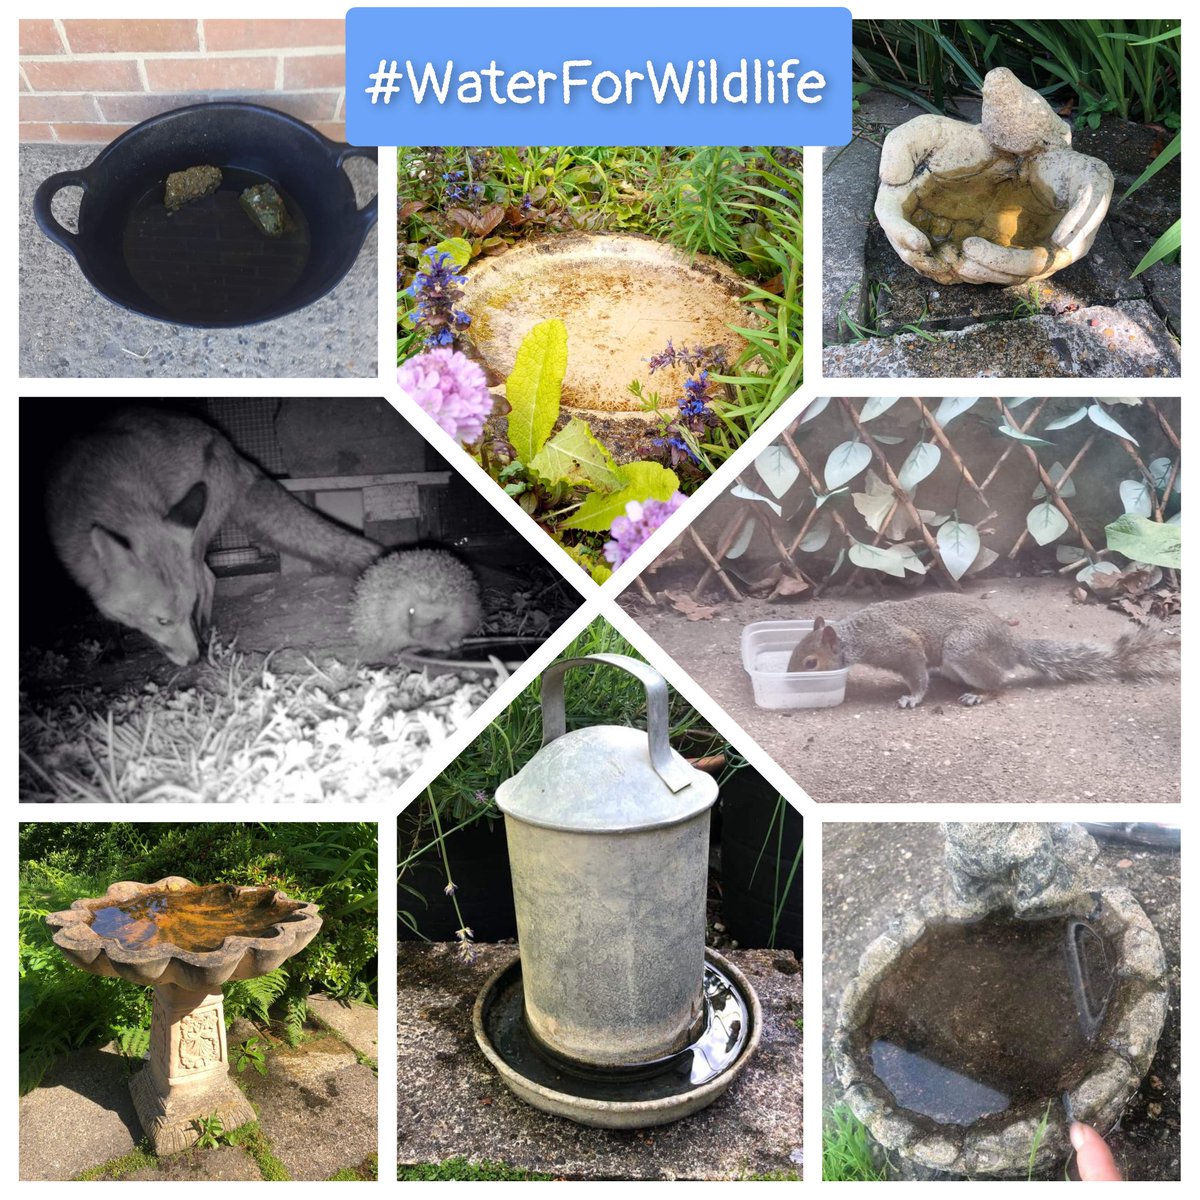 Don't forget to put out #waterforwildlife 

@OneVoiceforAni1